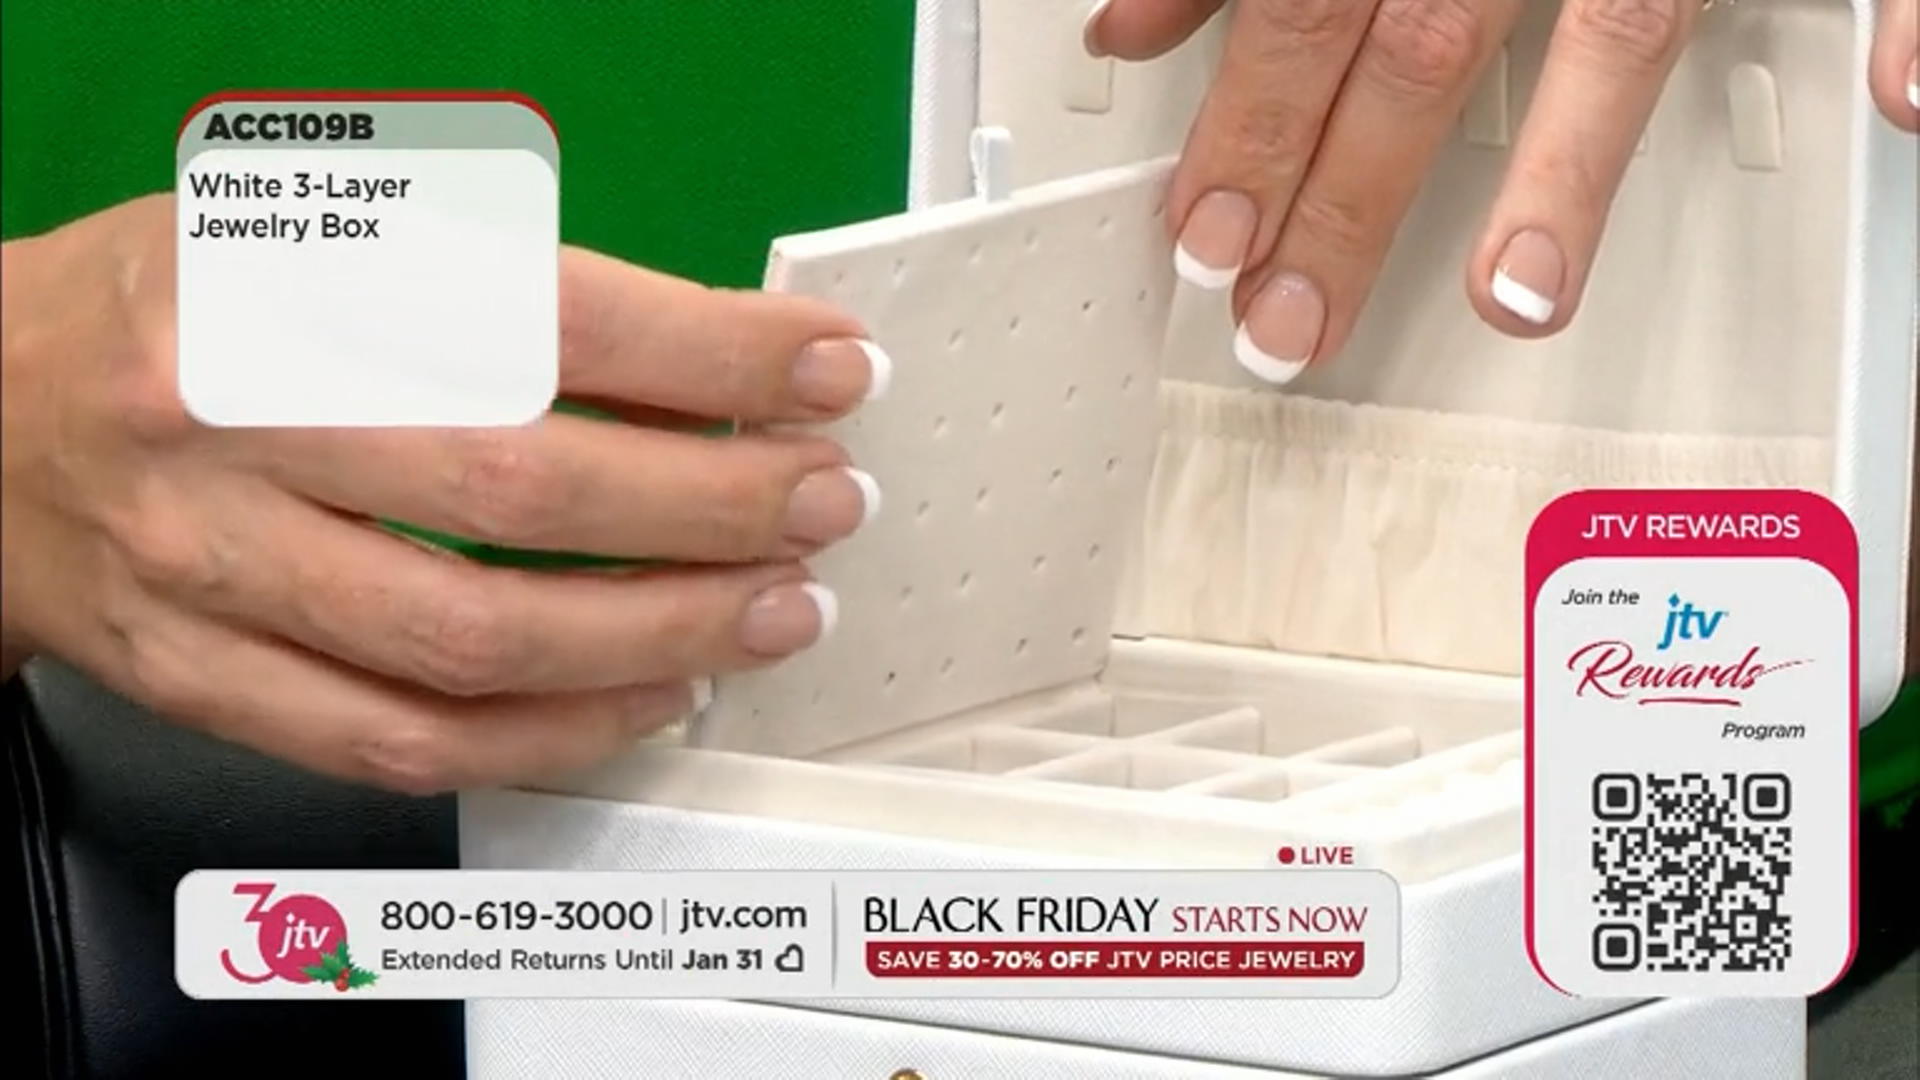 White Color 3 Layer Jewelry Box appx 6.7x4.7x3.14" Video Thumbnail